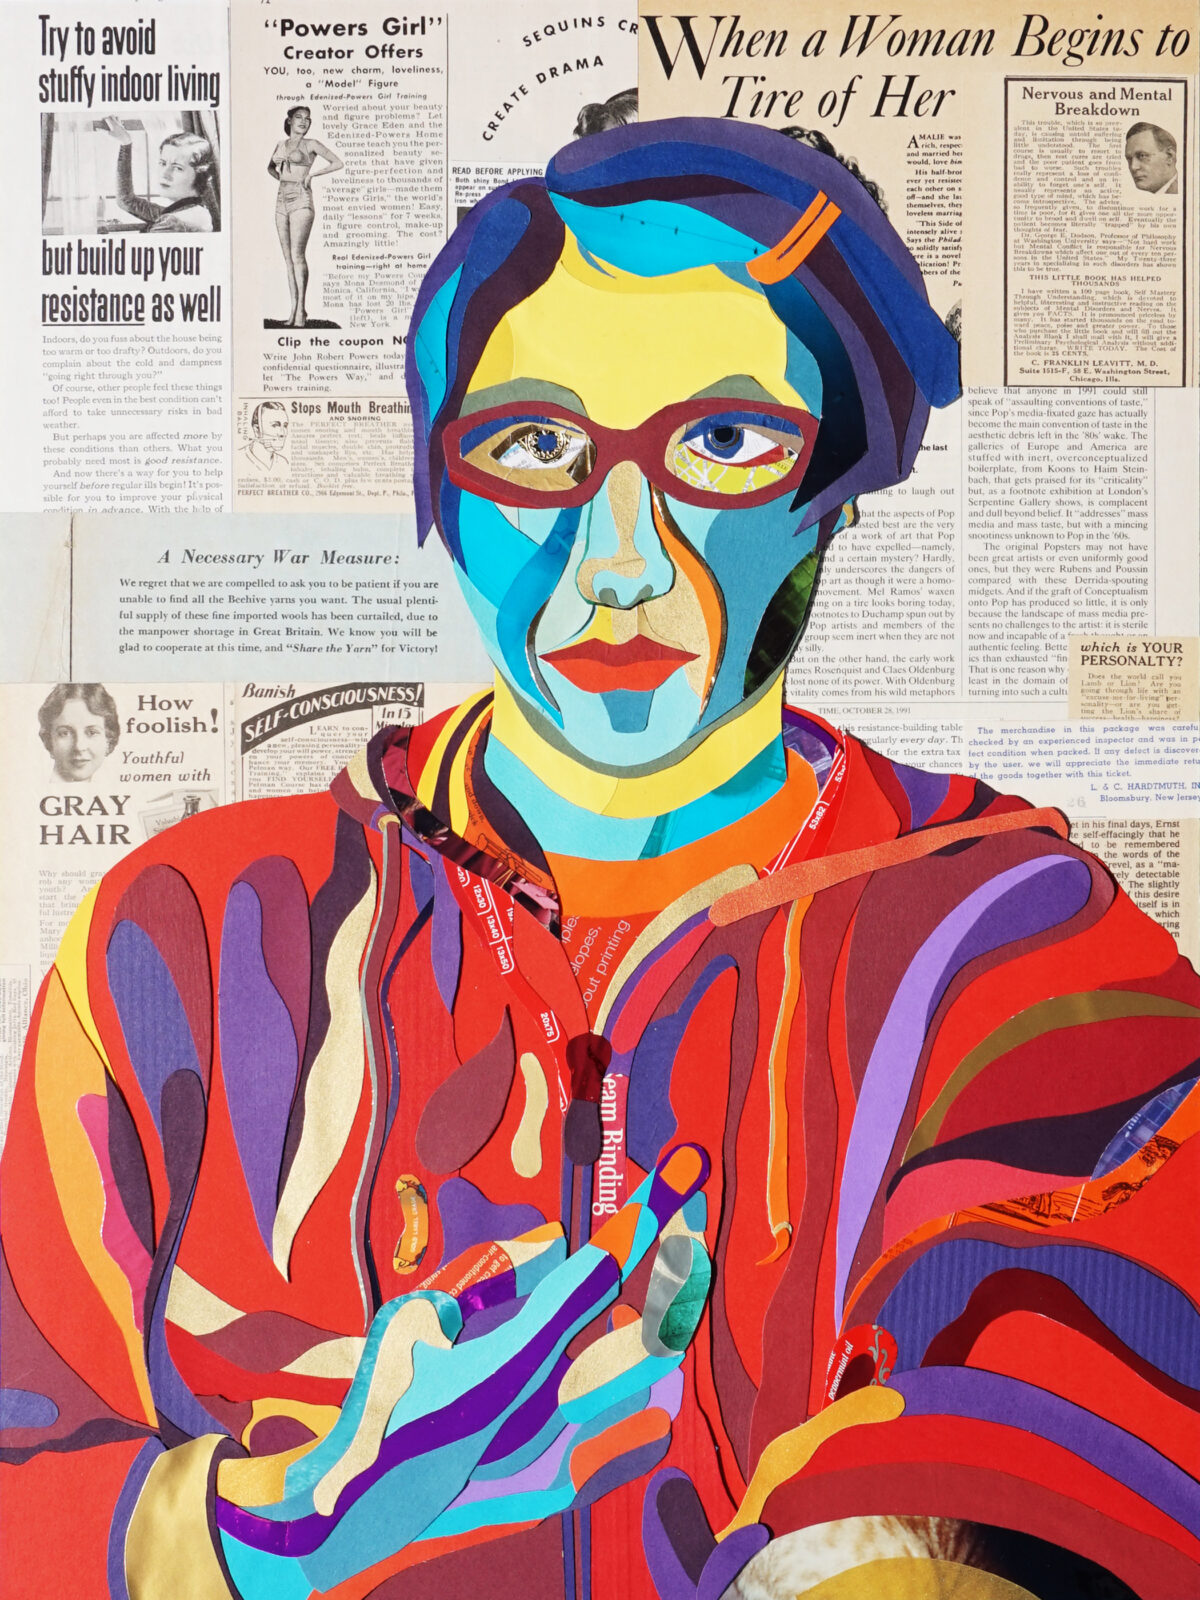 Layered paper image depicting me with a blue/yellow face, wearing a hoodie.